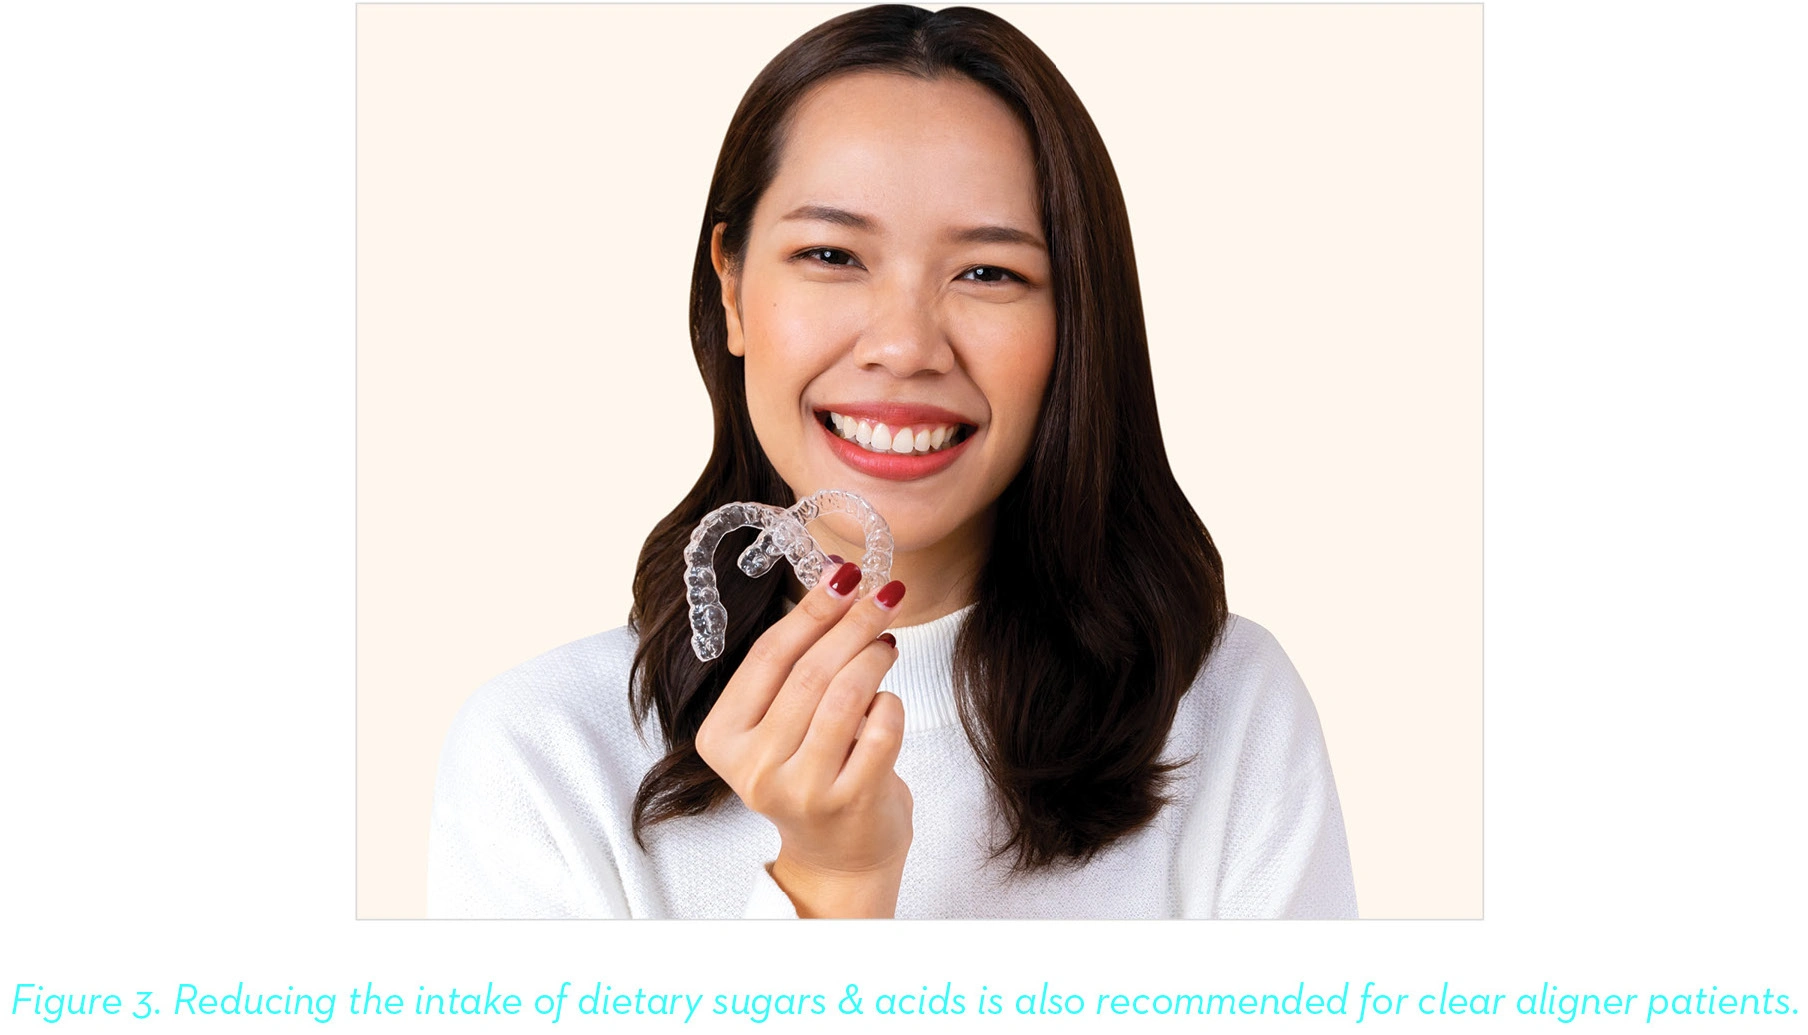 parents and patients must be counselled on the importance of reducing dietary sugars and acids to help reduce the pH of the plaque to the enamel surfaces. 